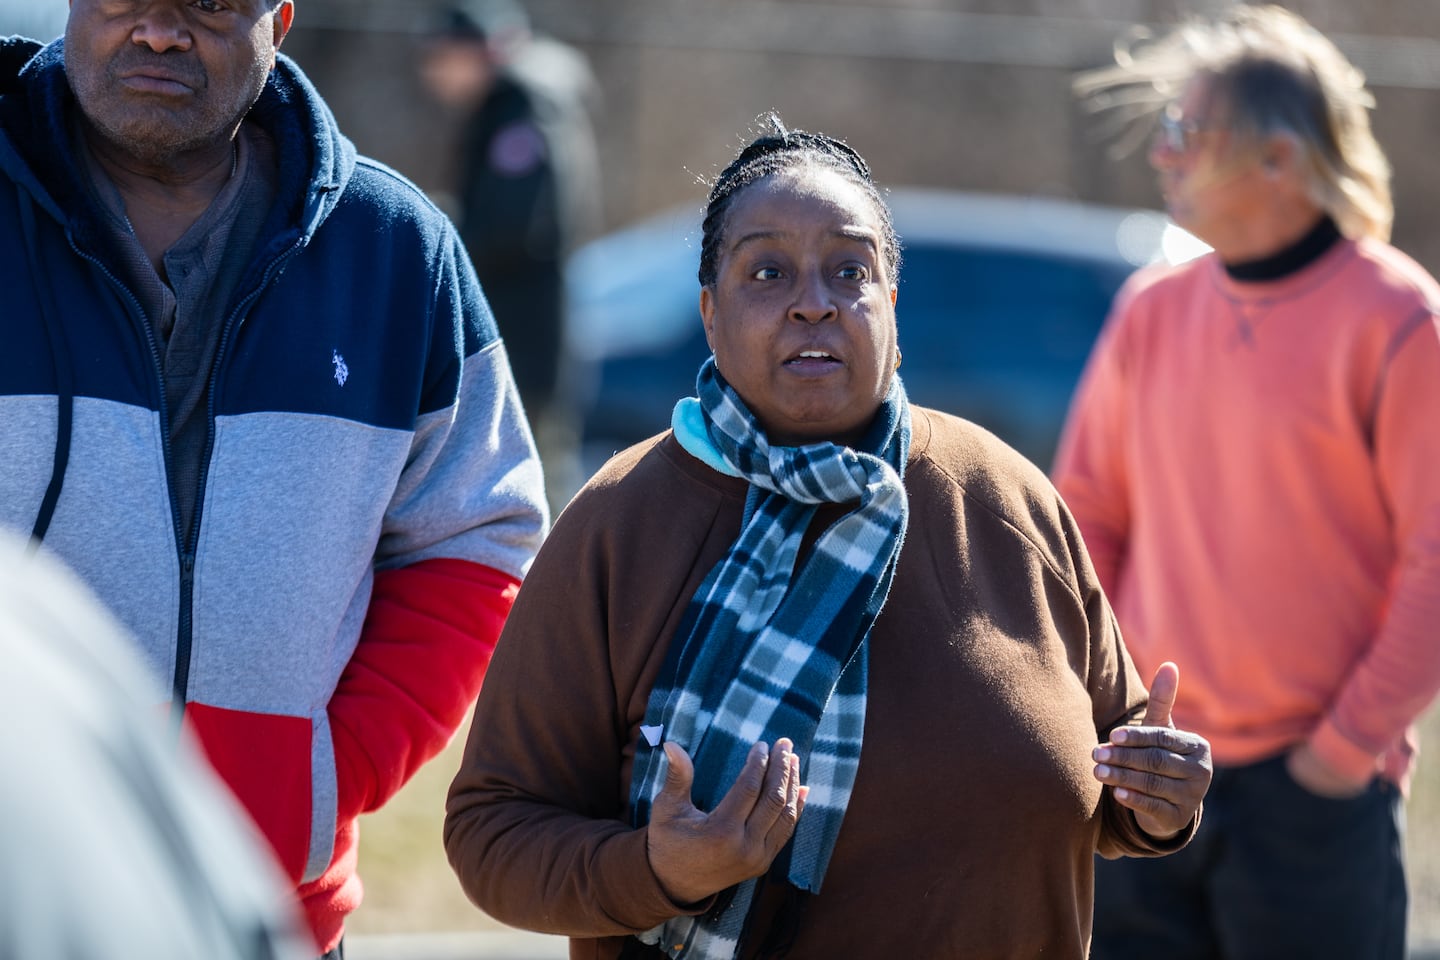 Cynthia Hodges, a mother to 3 children who have been through the Brockton public school system, expresses her frustration during a press conference held after a string of violence at the high school in Brockton.